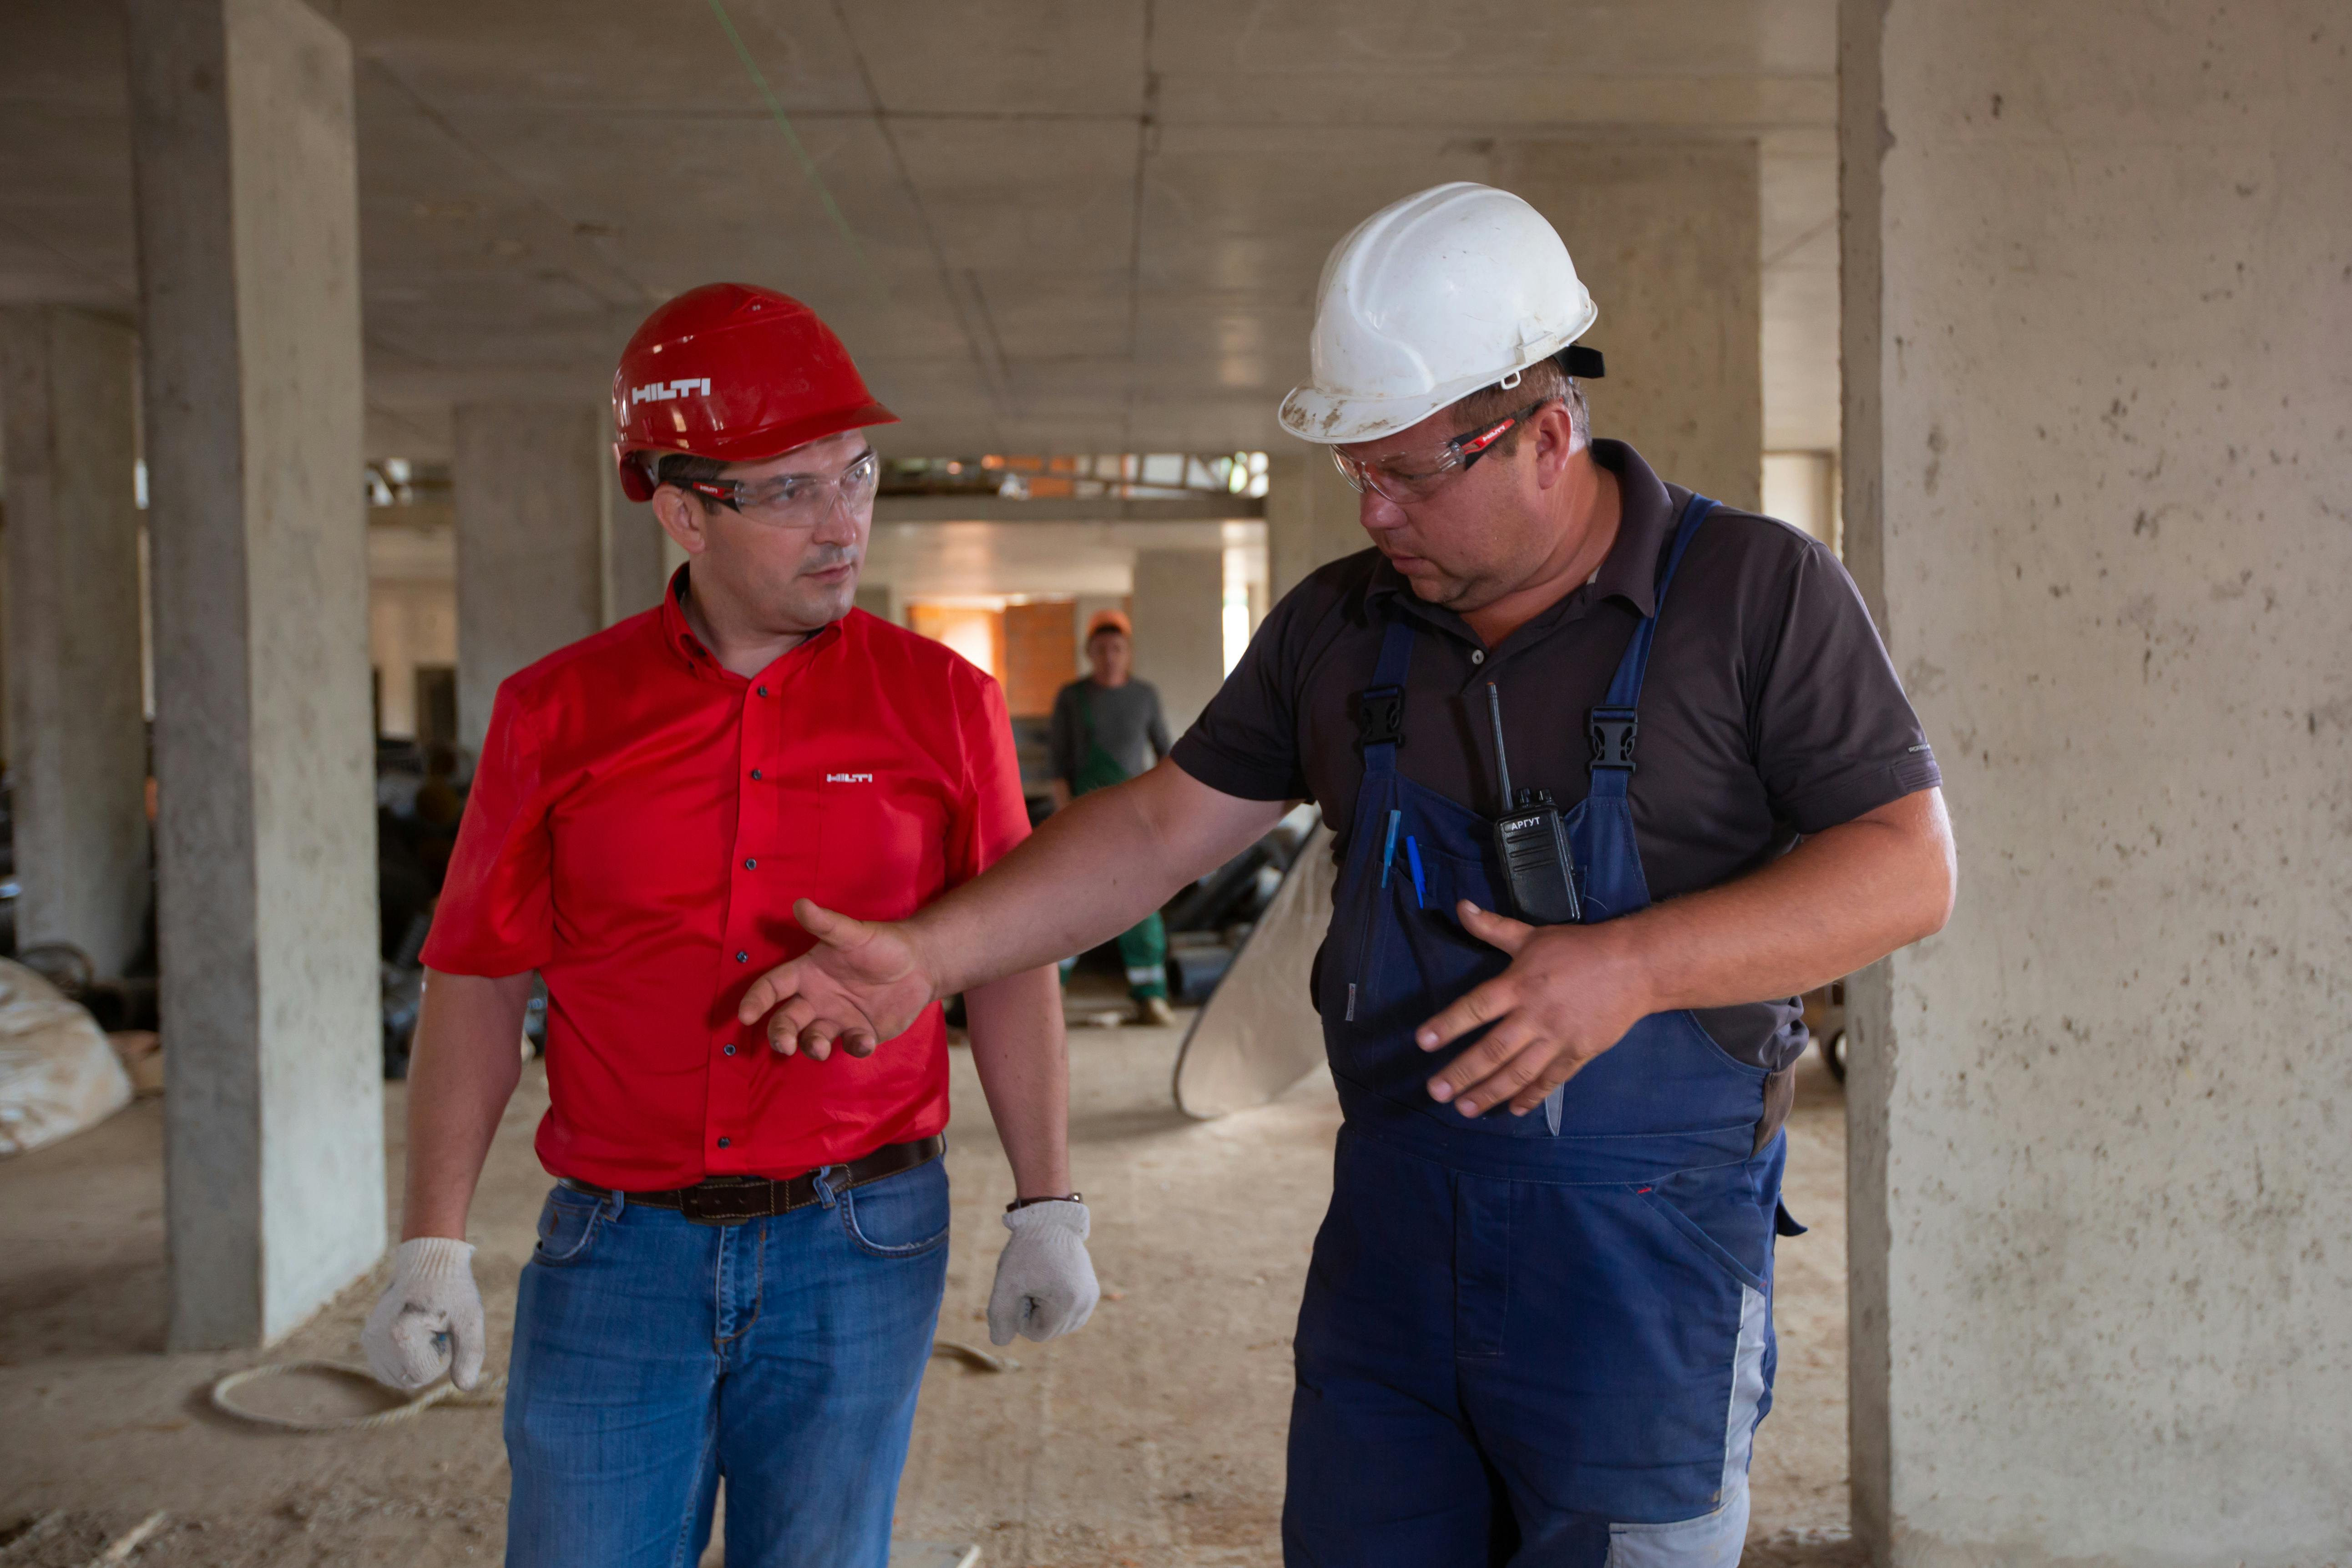 An image of two construction workers walking and talking